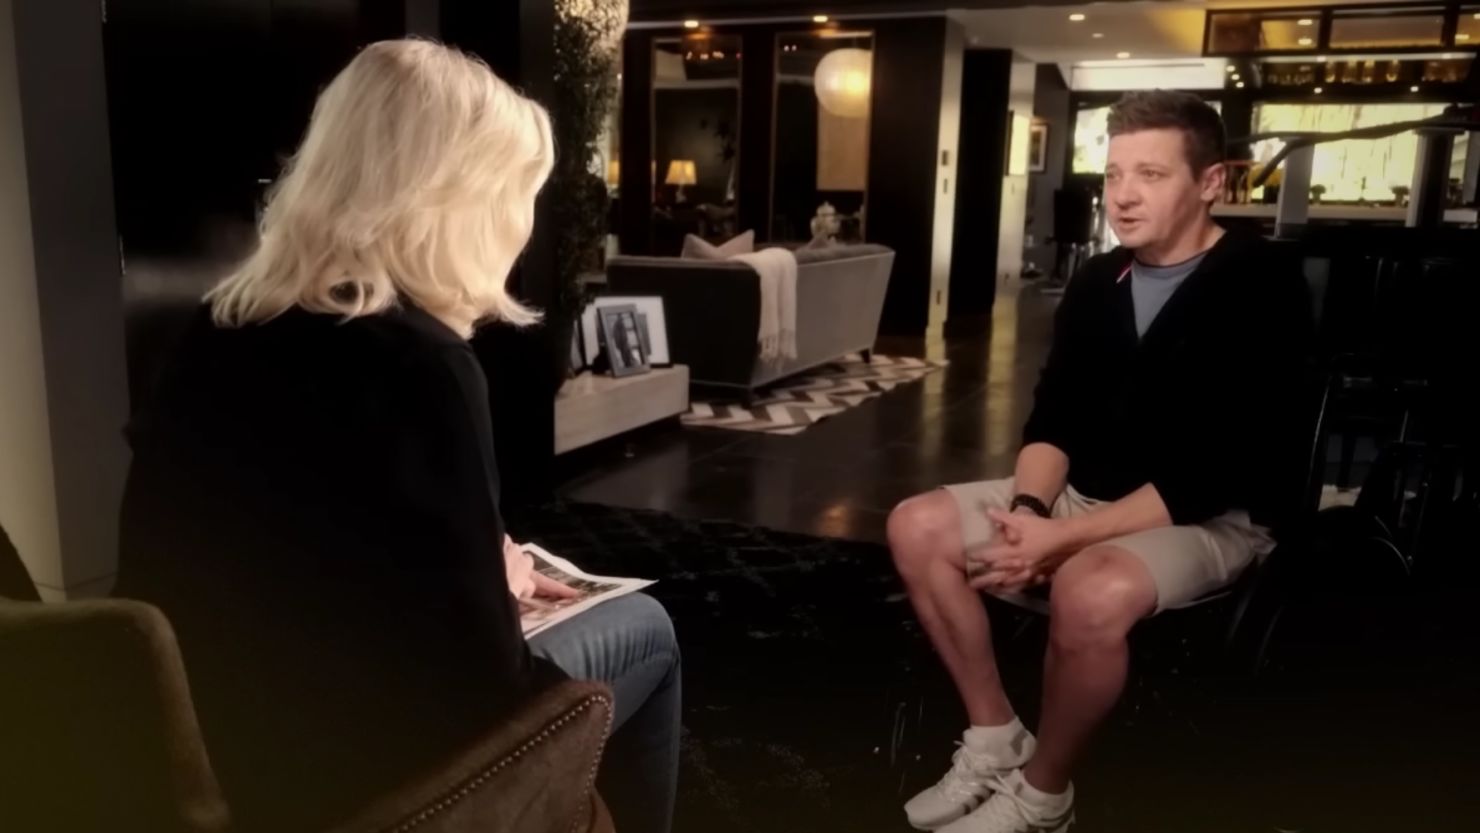 Jeremy Renner talks with Diane Sawyer about his accident and recovery in a new special for ABC News. 